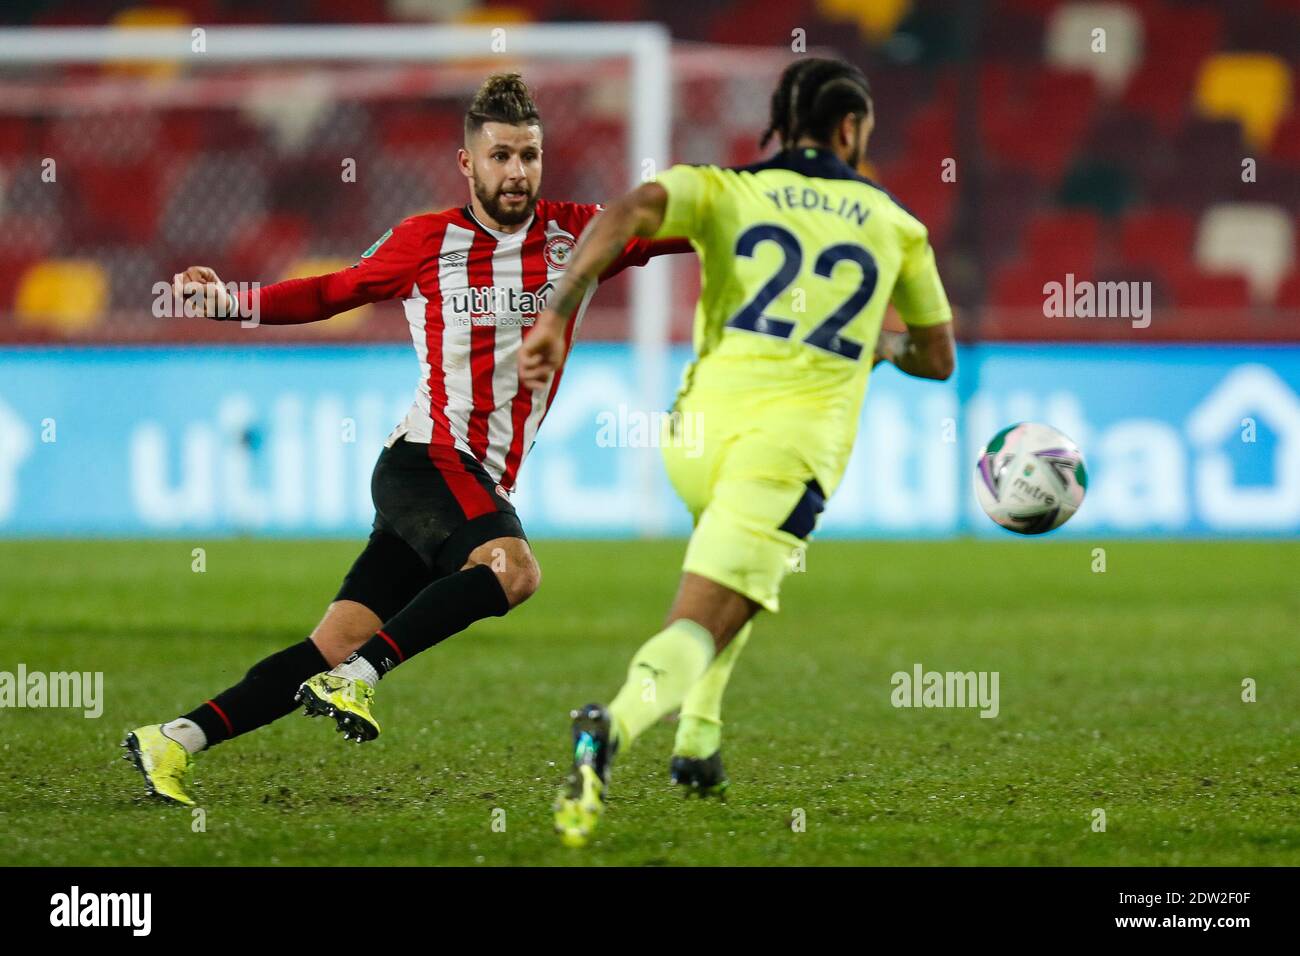 Brentford, UK. 22nd Dec, 2020. Emiliano Marcondes of Brentford and DeAndre Yedlin of Newcastle United during the Carabao Cup Quarter Final match between Brentford and Newcastle United at the Brentford Community Stadium, Brentford Picture by Mark D Fuller/Focus Images/Sipa USA 22/12/2020 Credit: Sipa USA/Alamy Live News Stock Photo